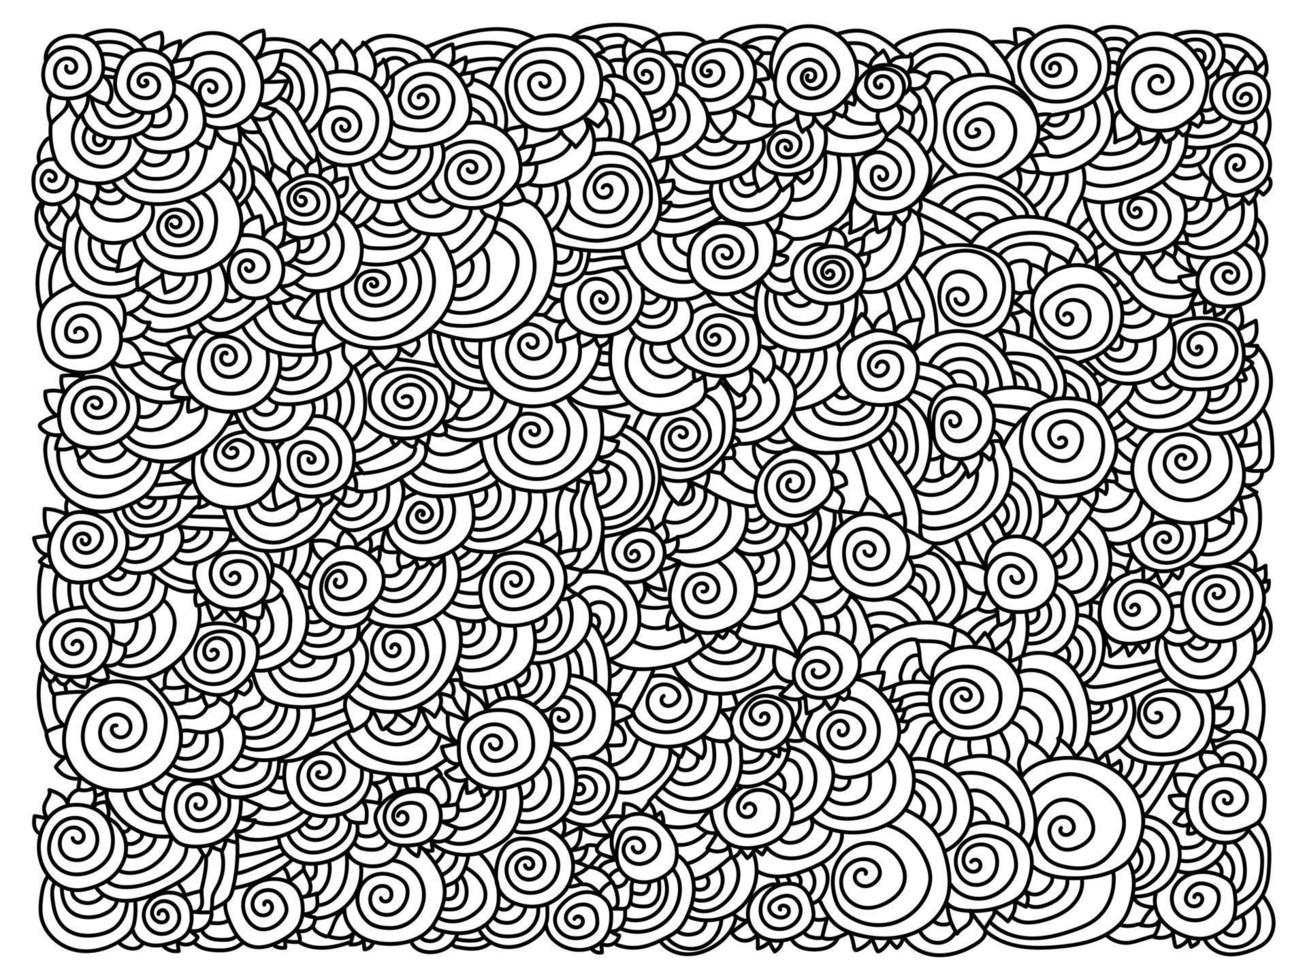 Abstract meditative coloring page with ornate patterns of spirals and striped motifs vector